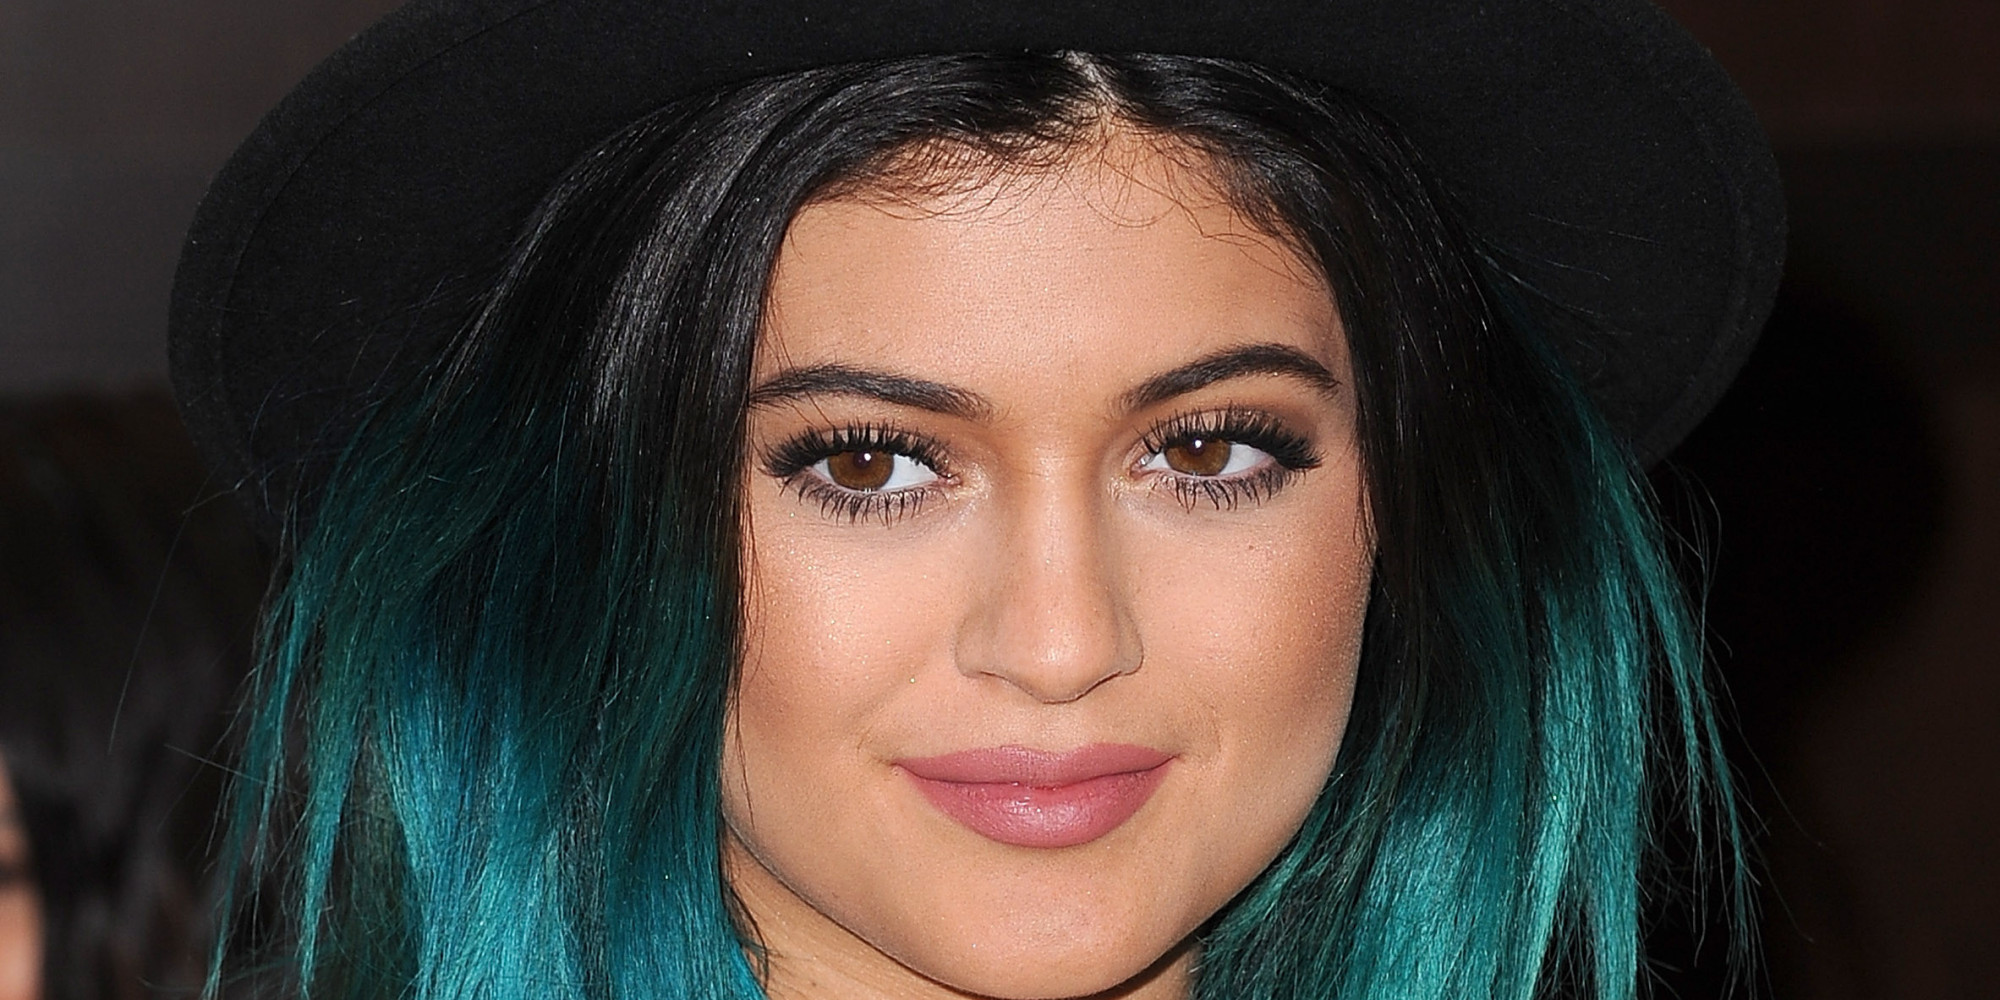 5. "Celebrities Rocking Turquoise Blue Hair Color" - wide 6